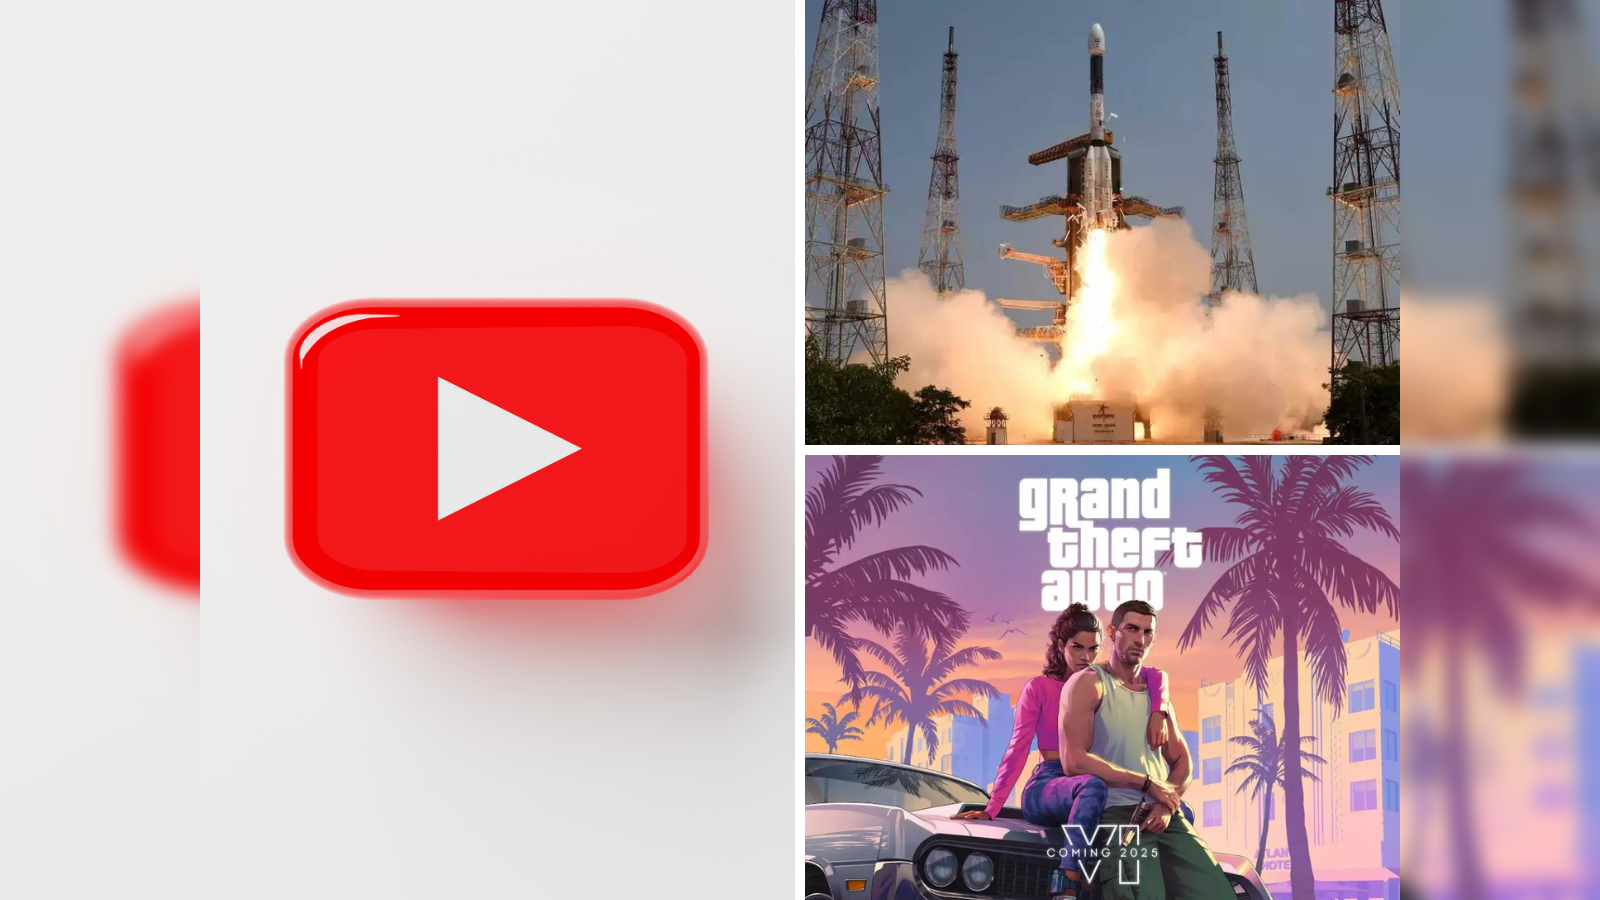 The 'GTA 6' trailer has already broke the record for most views in